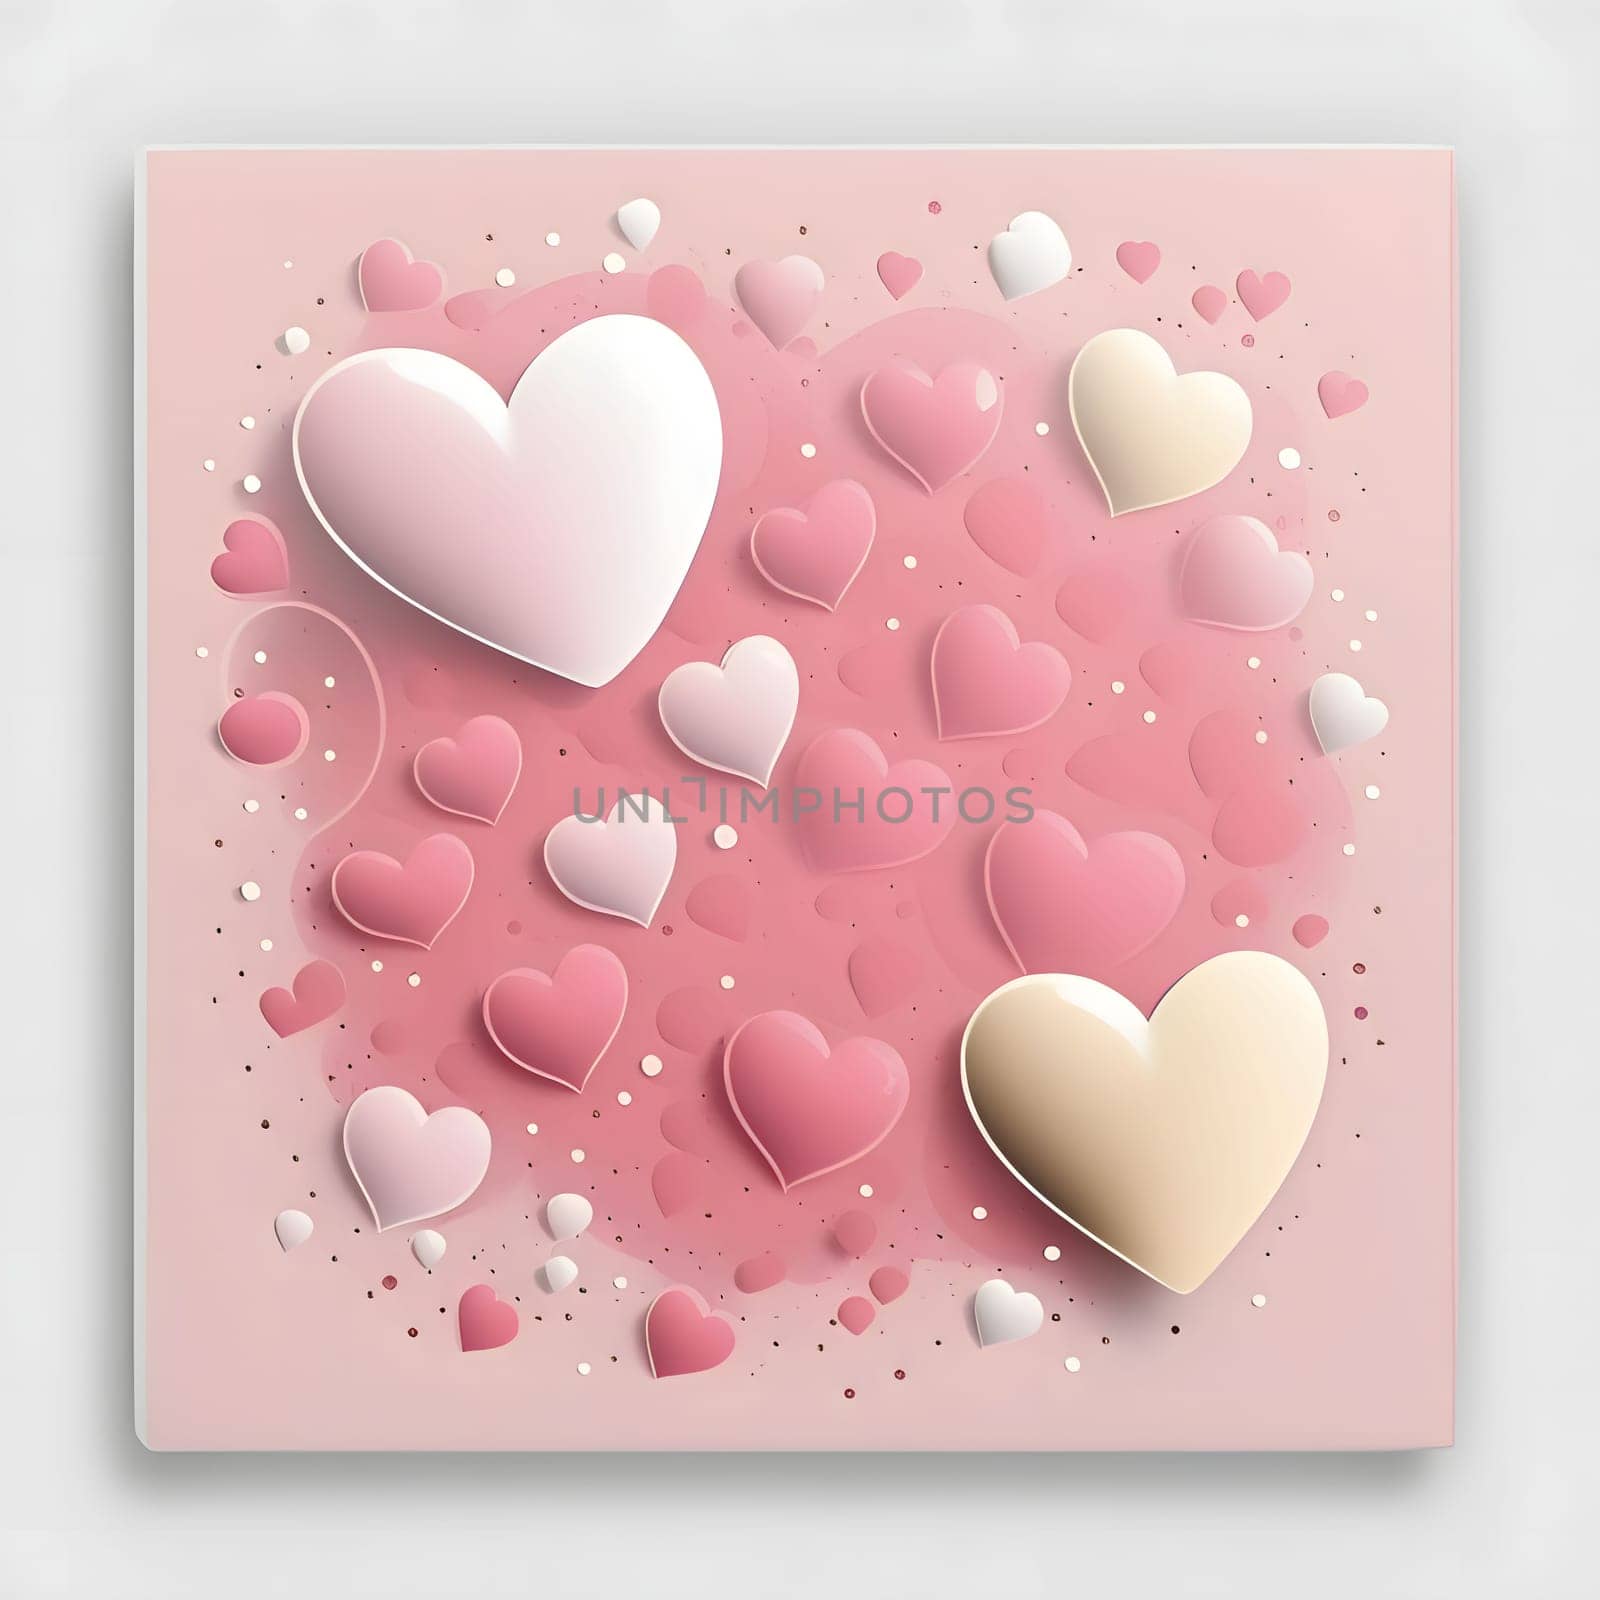 Pink and white hearts on a pink background card. Heart as a symbol of affection and love. The time of falling in love and love.